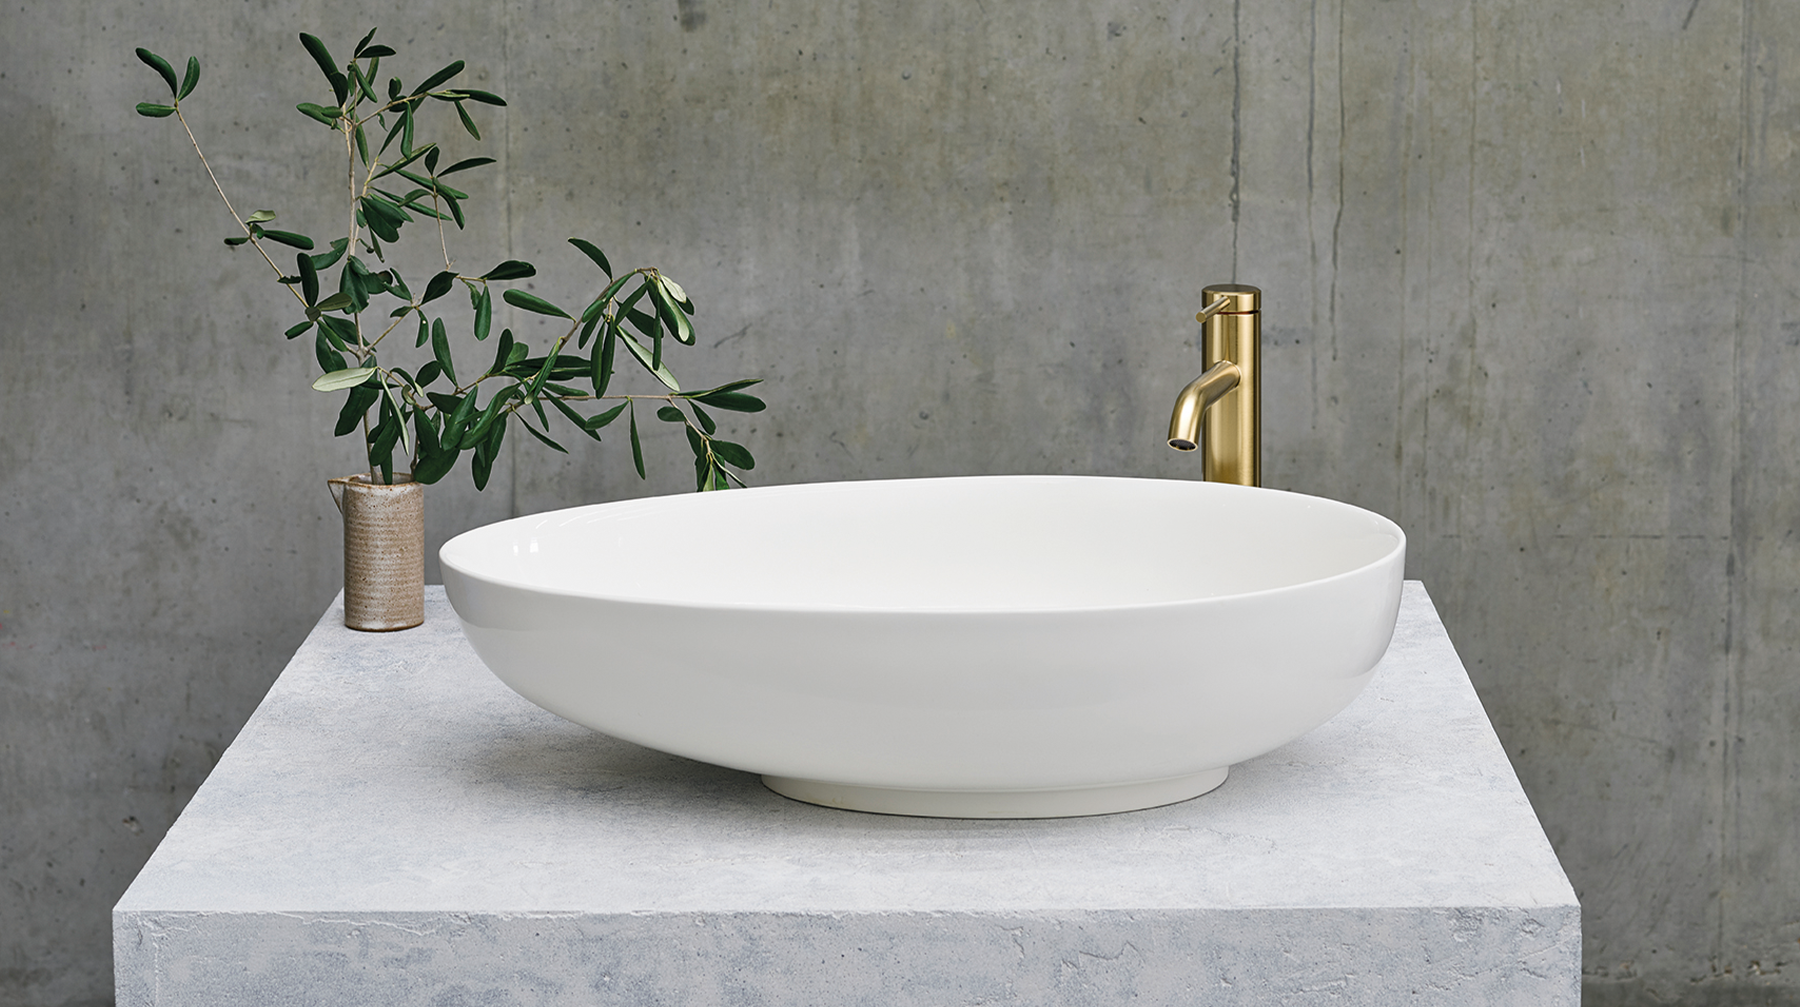 Luxury Bathroom Ideas | Create a nod to the stone bathroom trend with a stone basin for your luxury contemporary bathroom suite